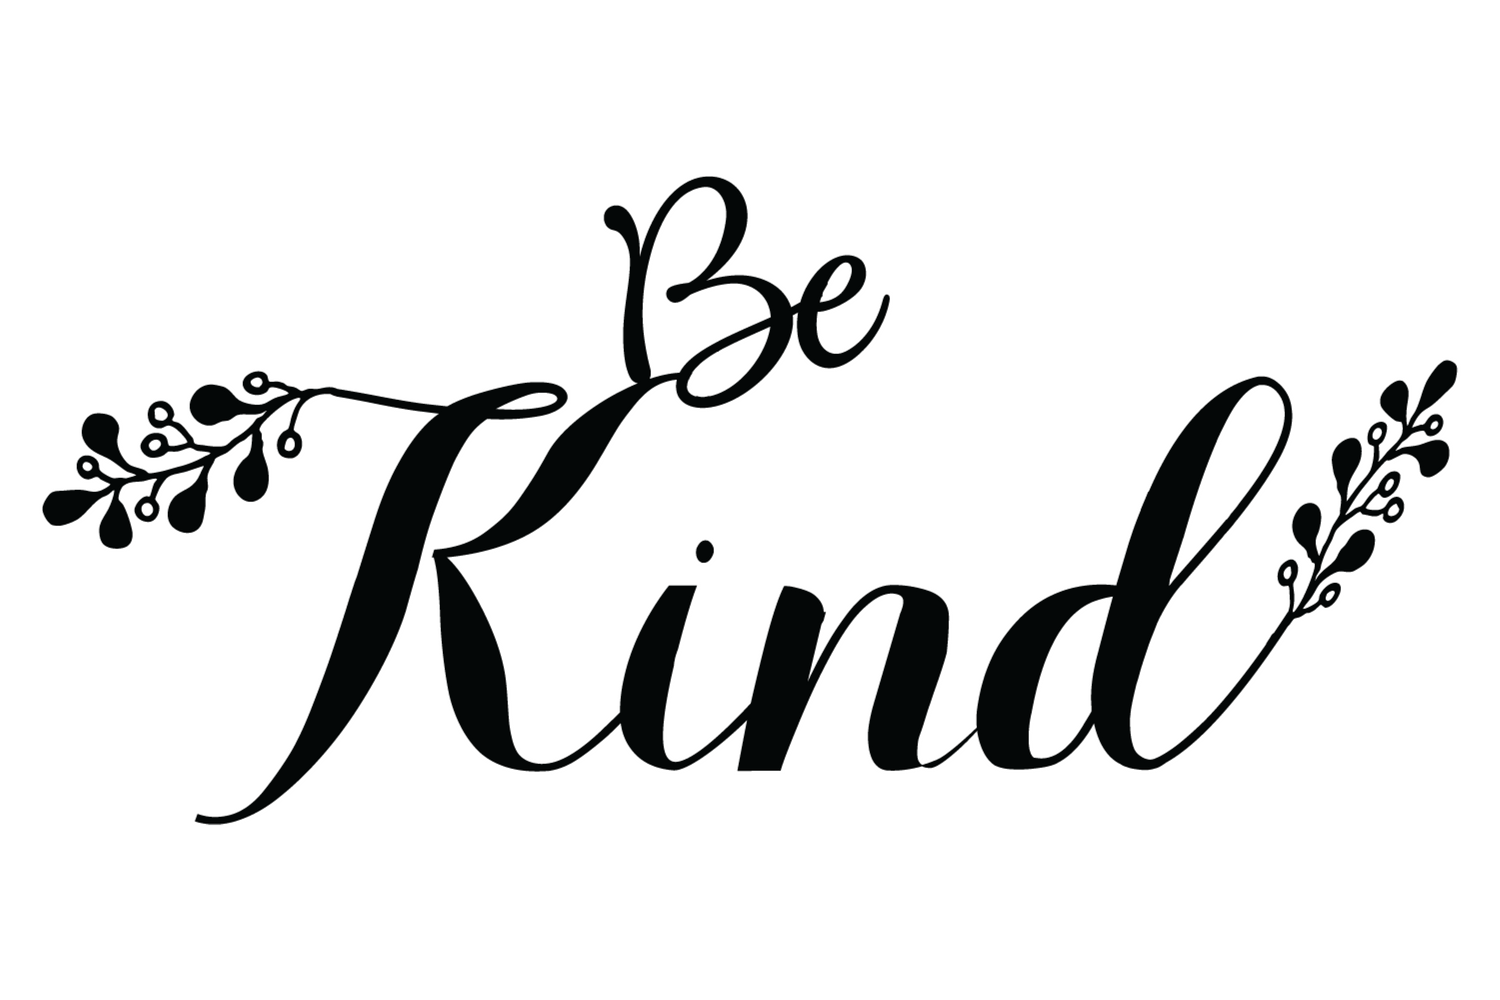 Be kind слова. Be kind. Kind надпись. Be kind logo. Надпись Kindness.